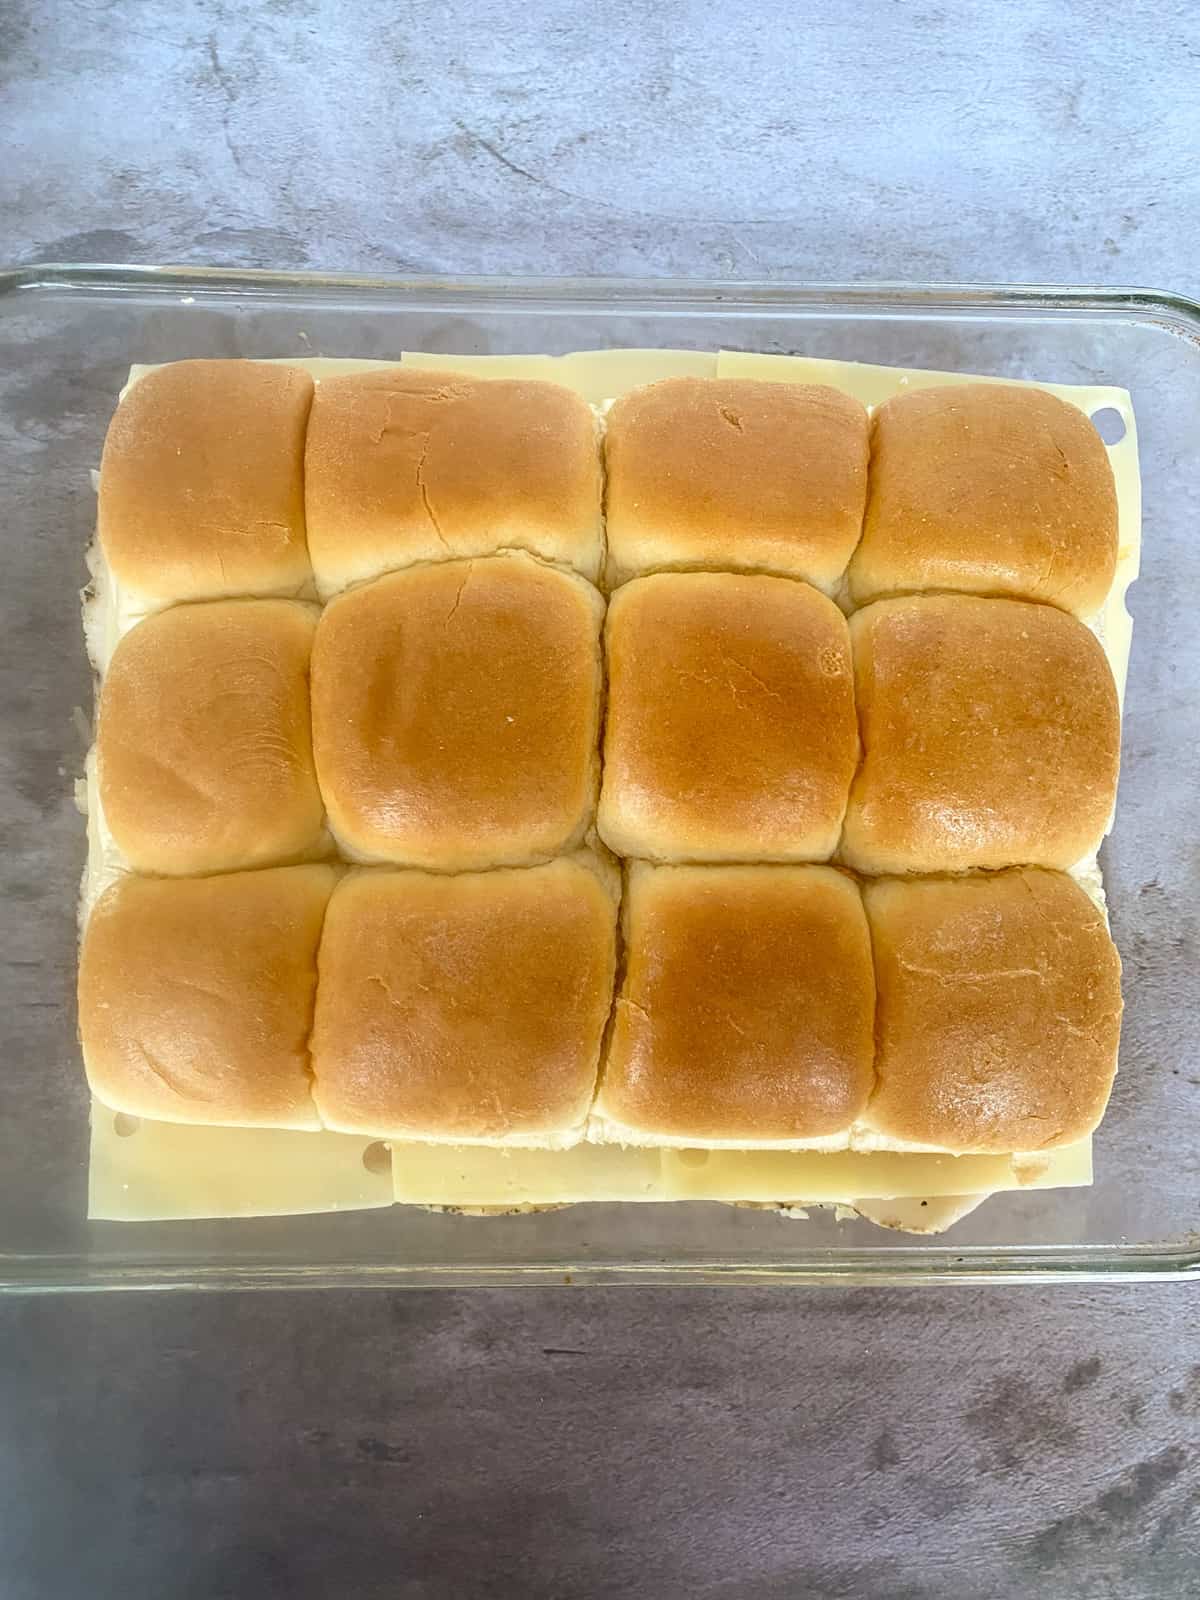 the tops of the buns place on top of the assembled sliders